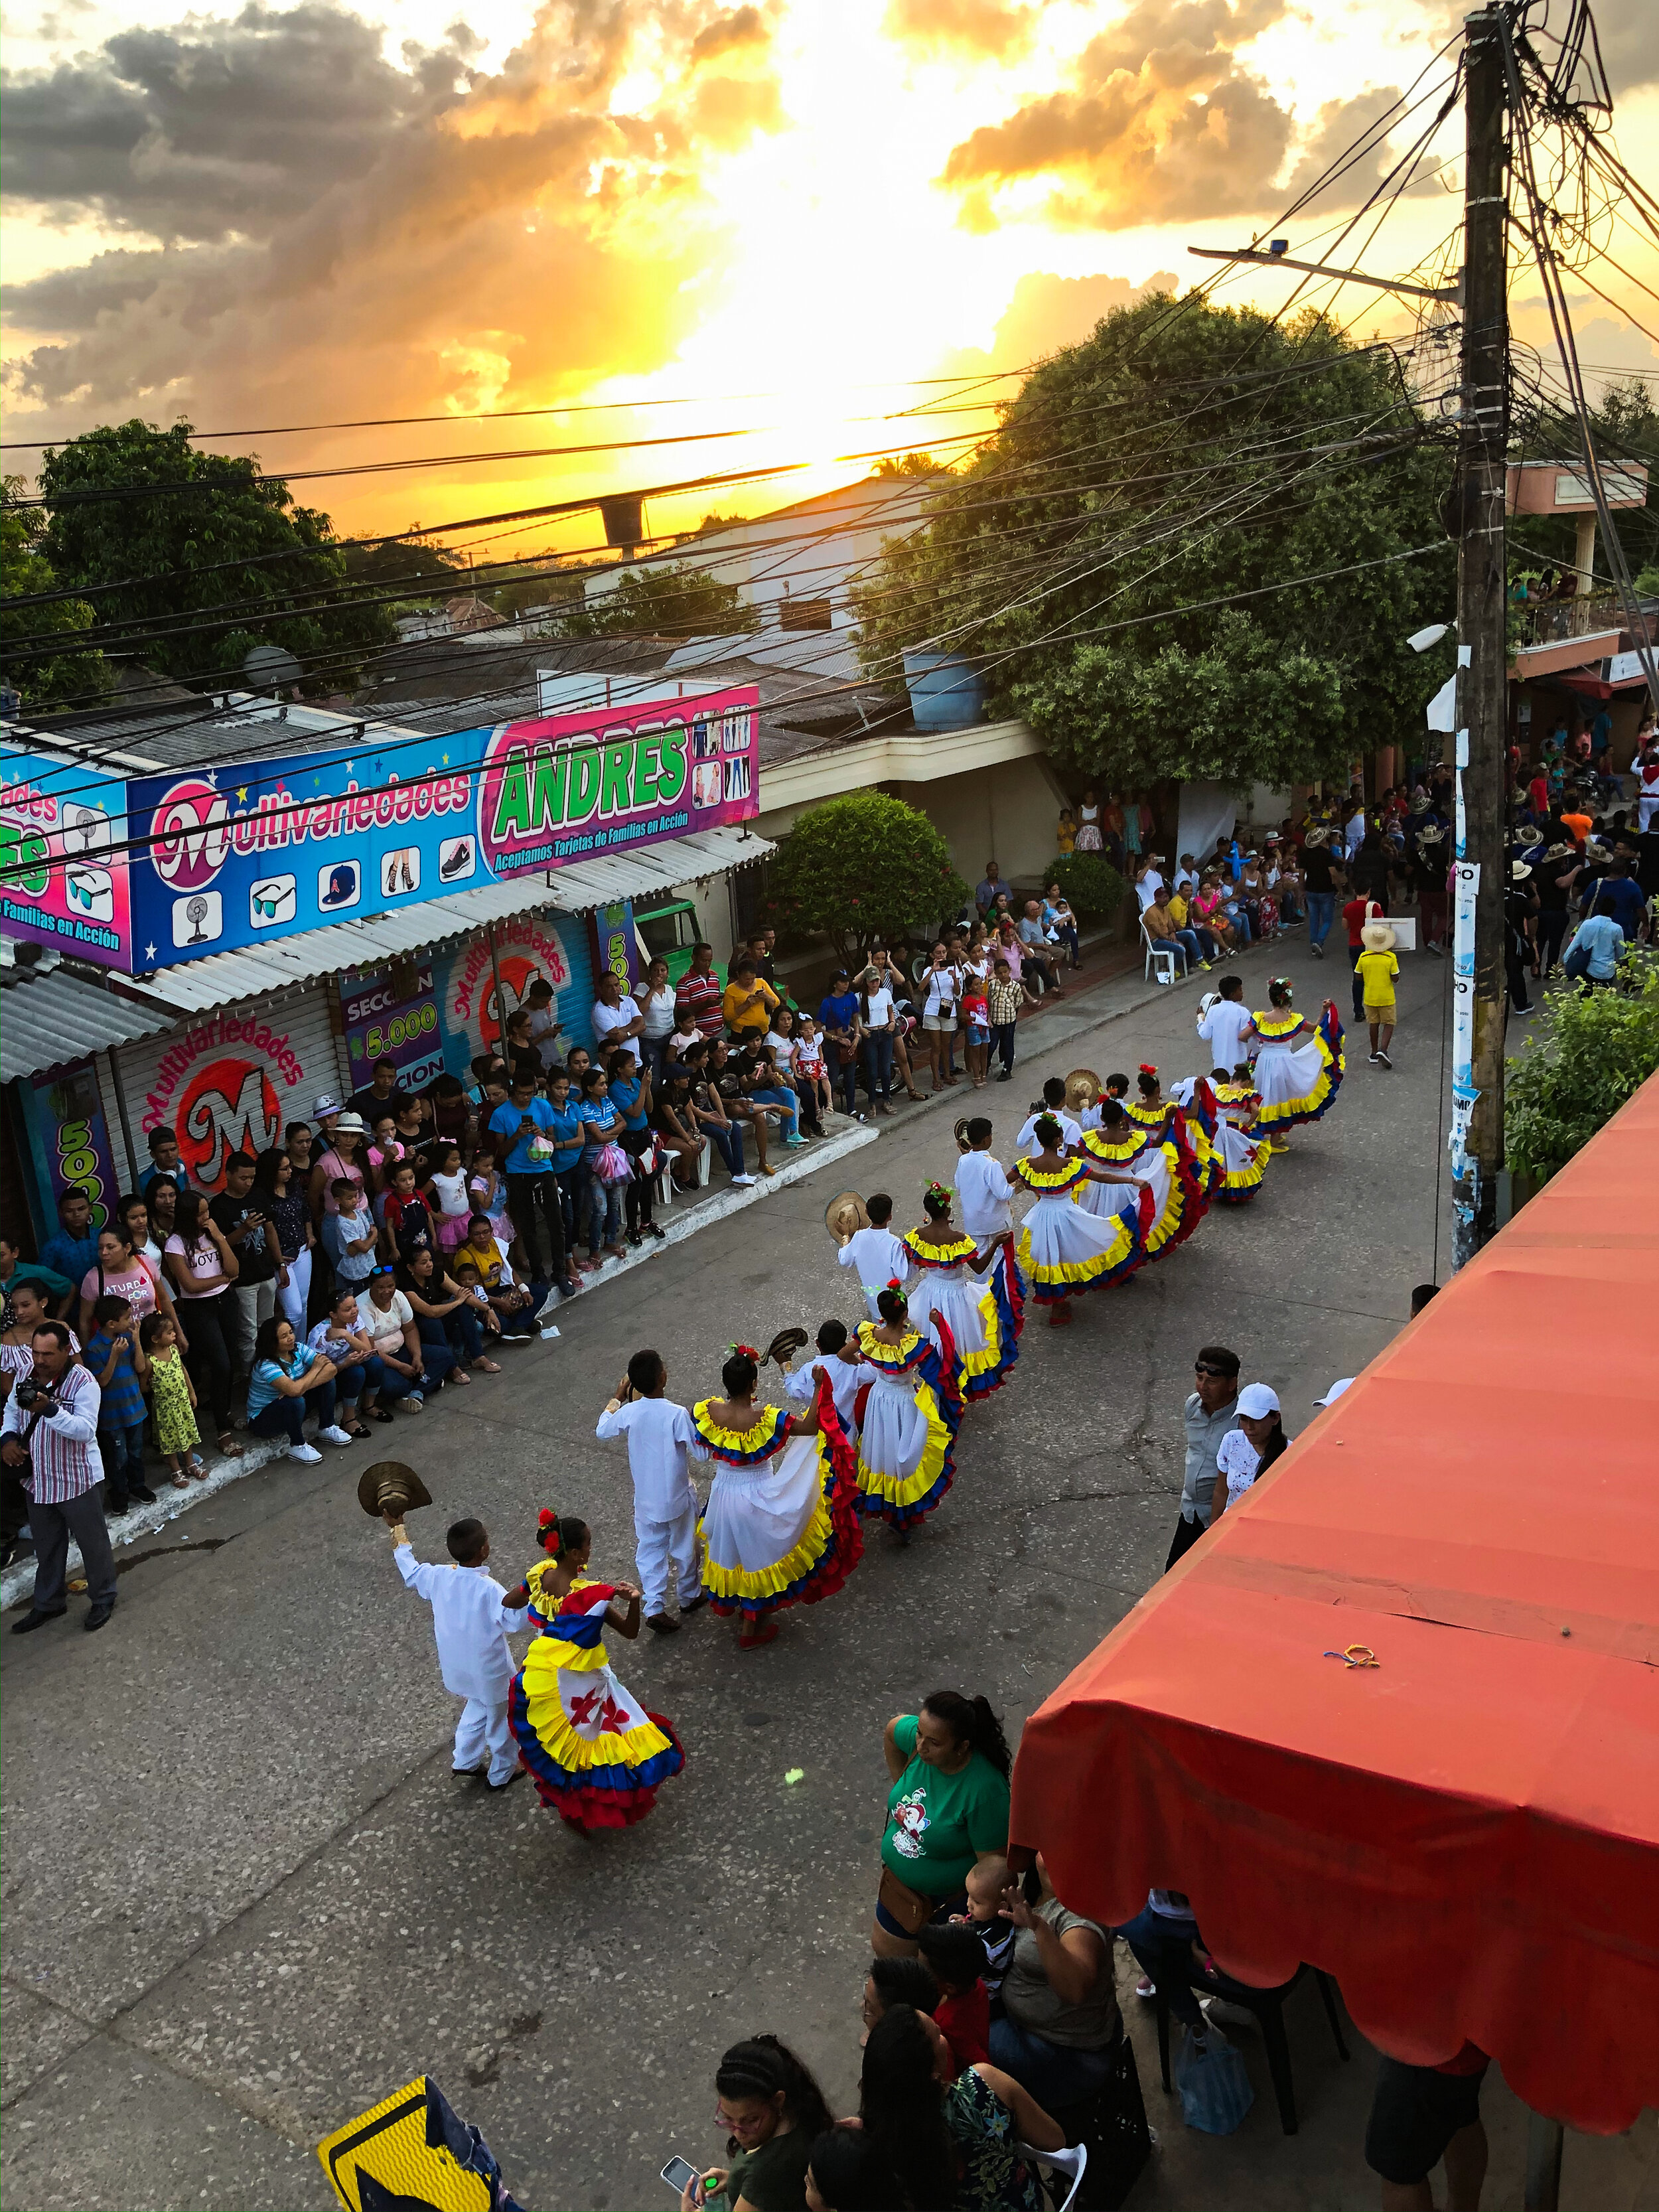  The cumbia parade through the streets of Galeras 